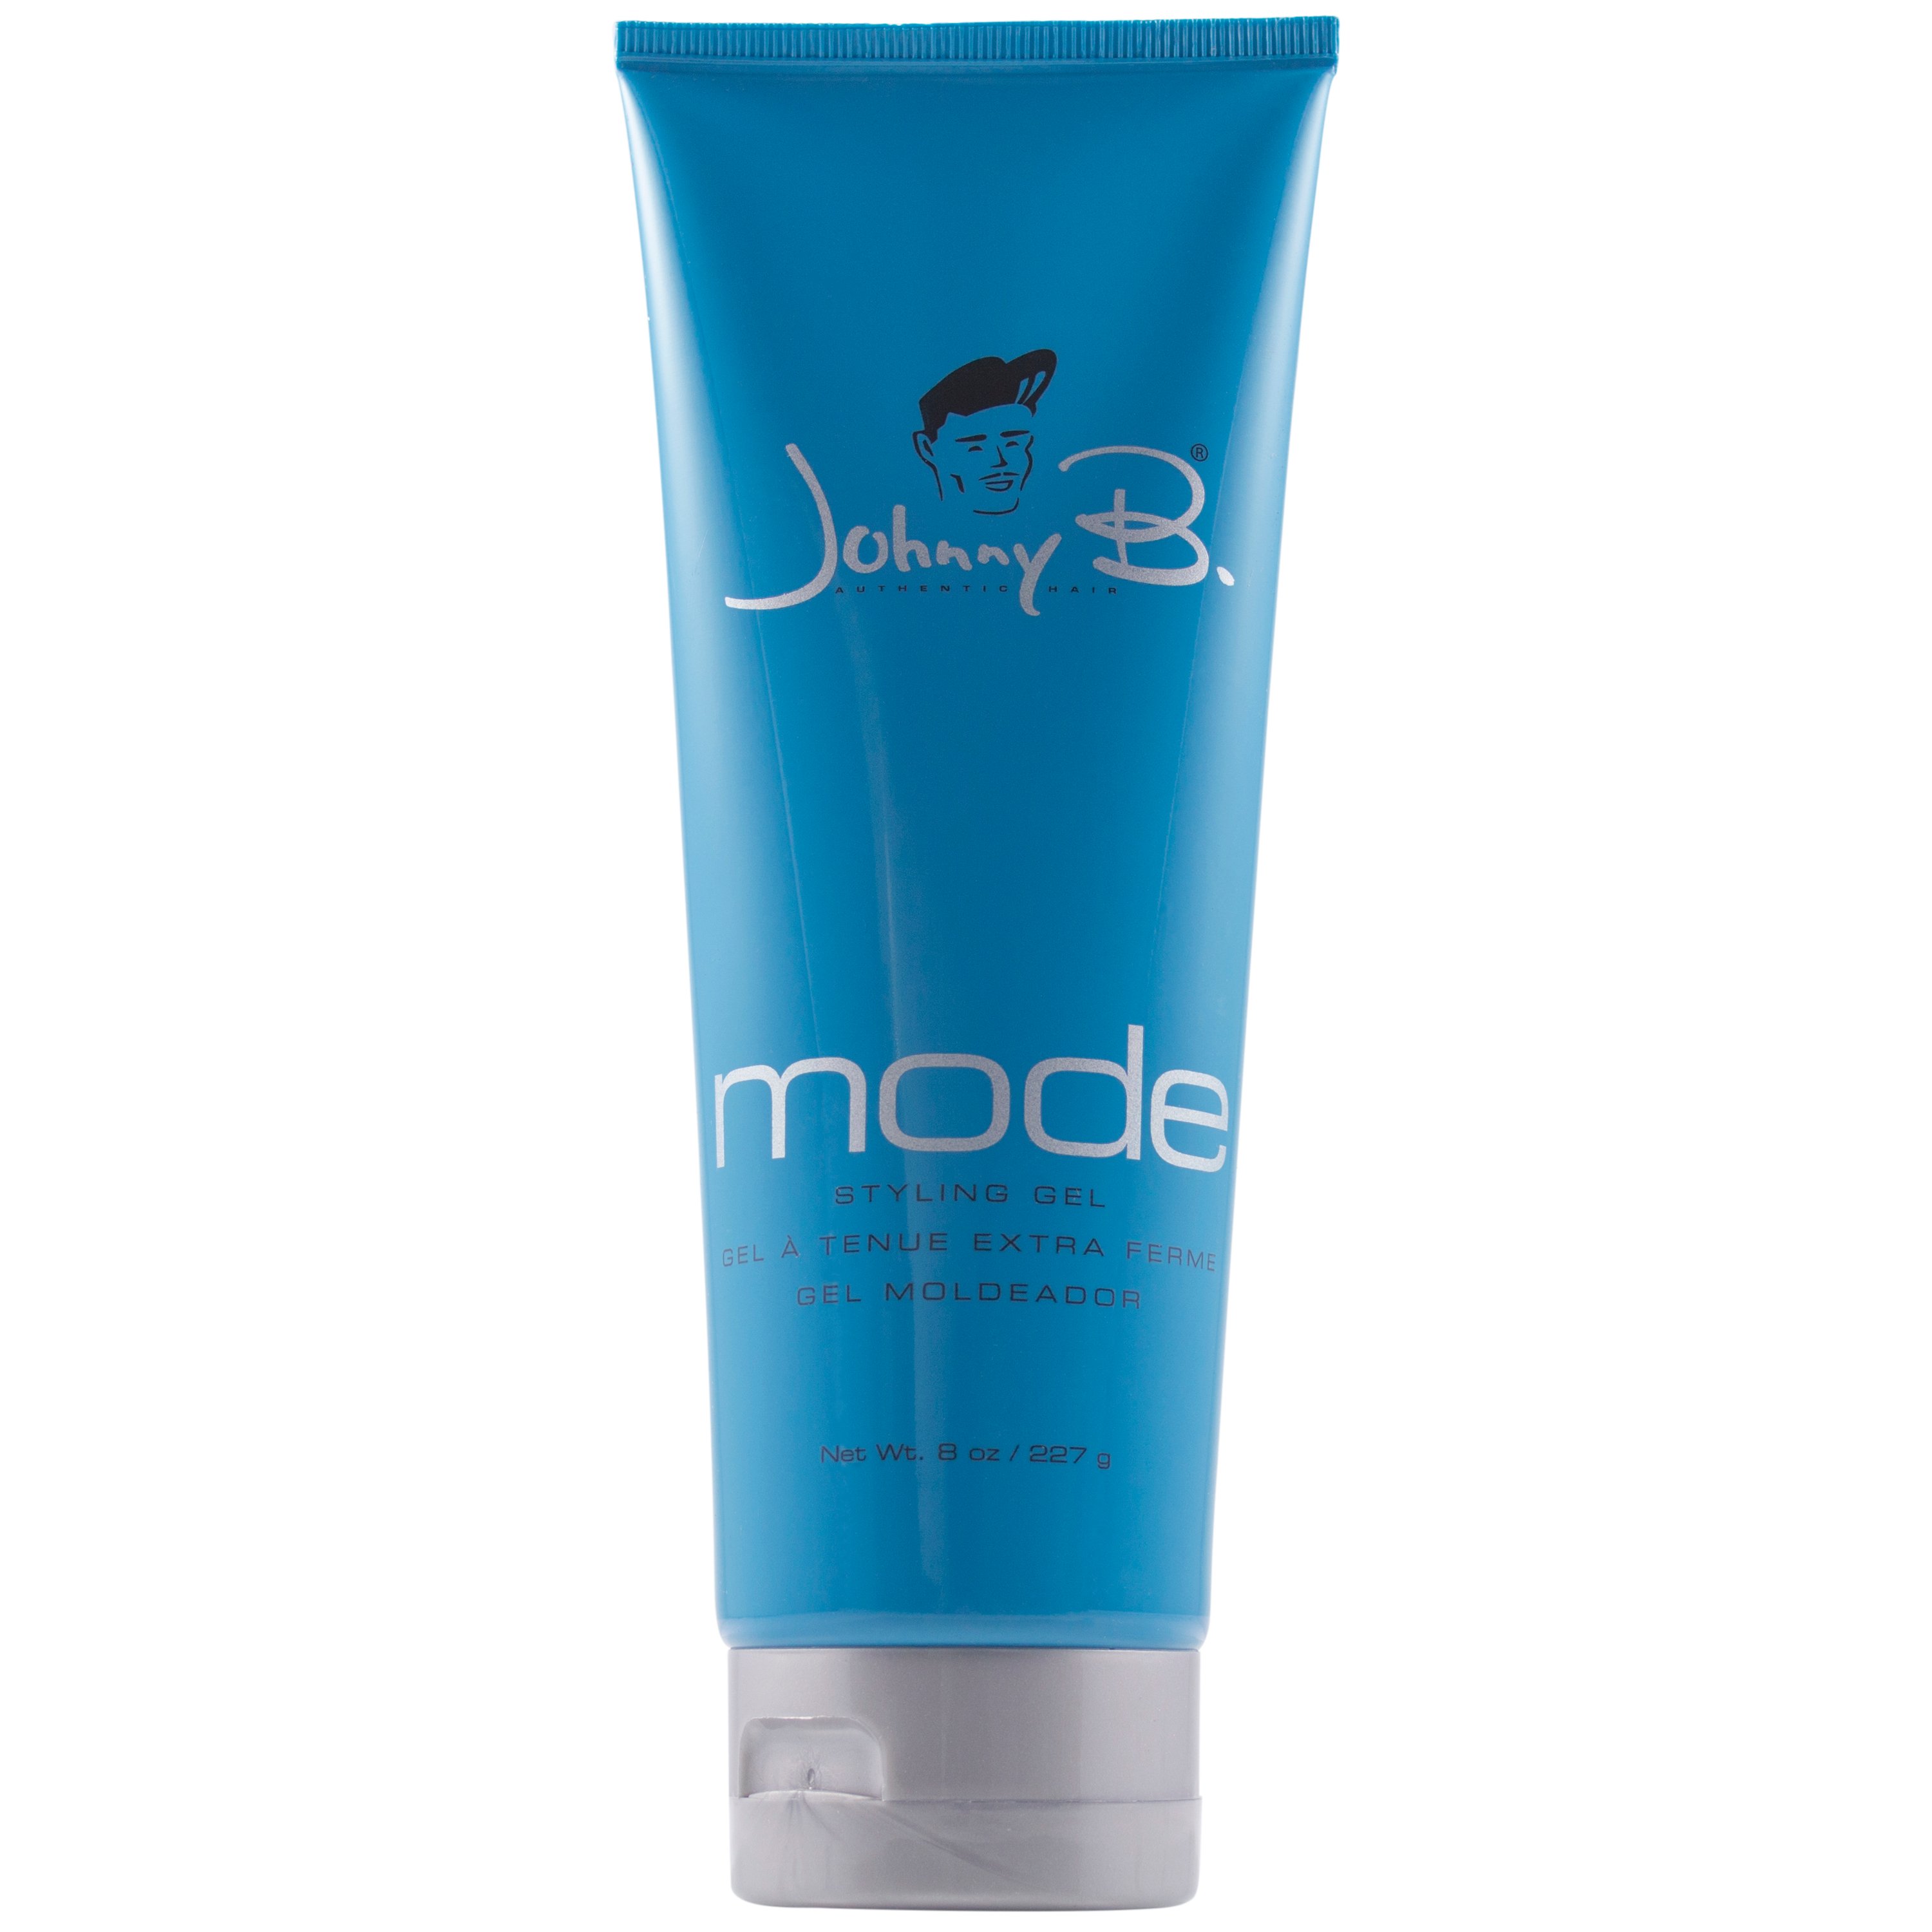 Johnny B Mode Styling Gel - Shop Hair Care at H-E-B